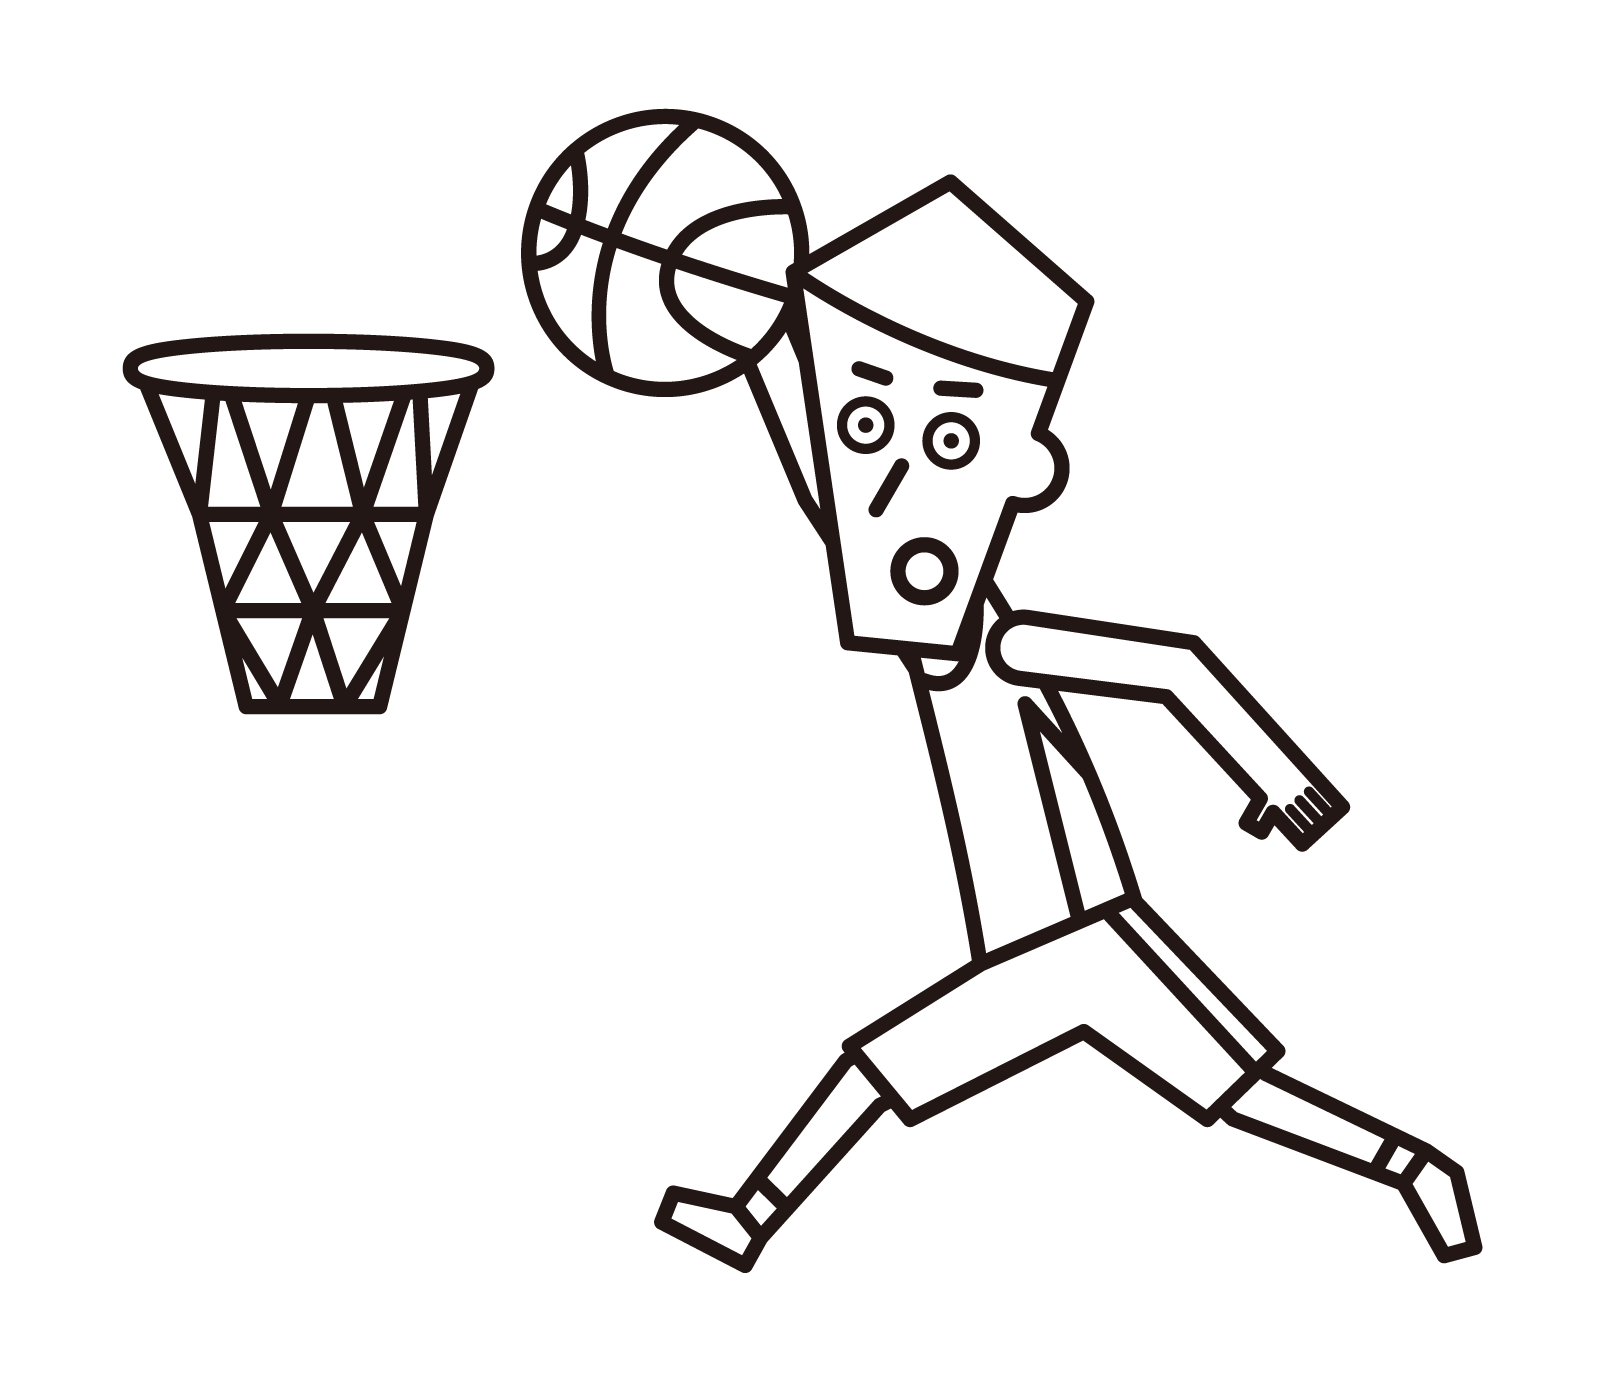 Illustration of a basketball player (male) dunking